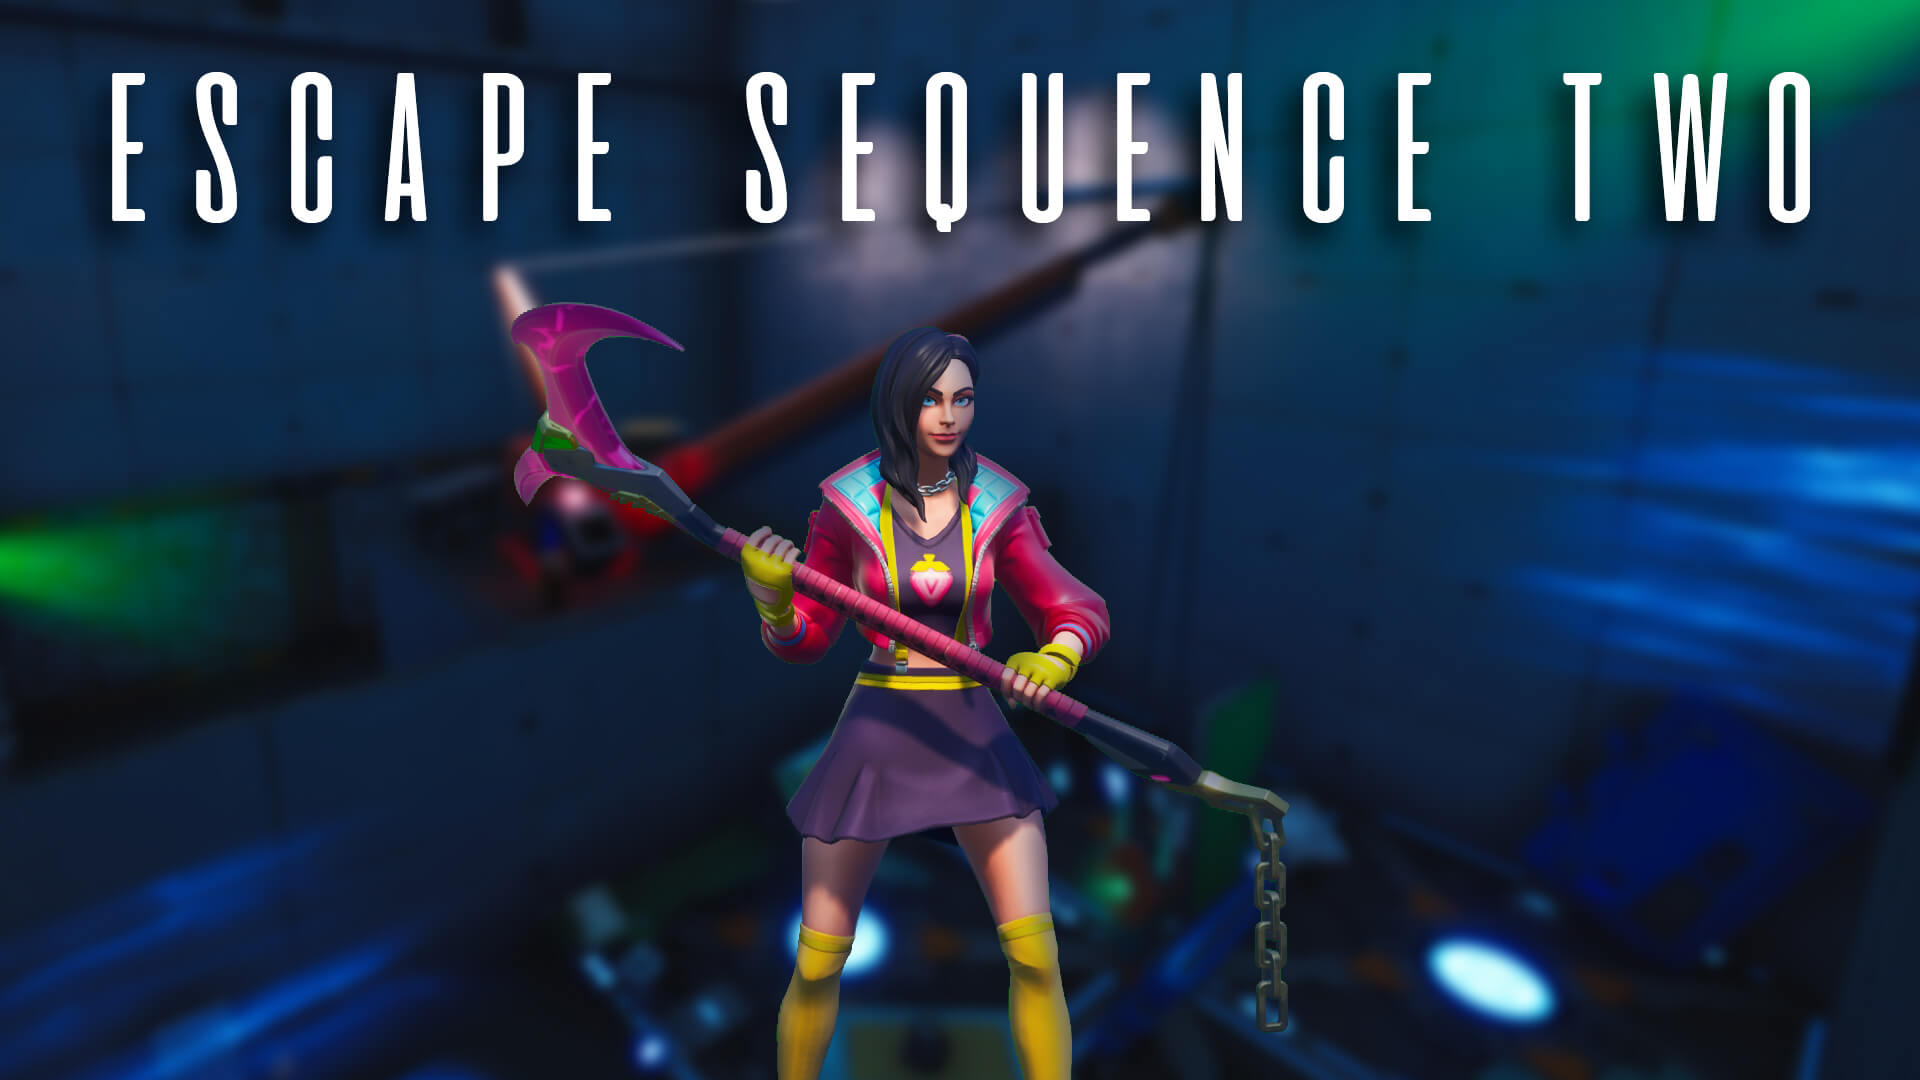 ESCAPE SEQUENCE TWO